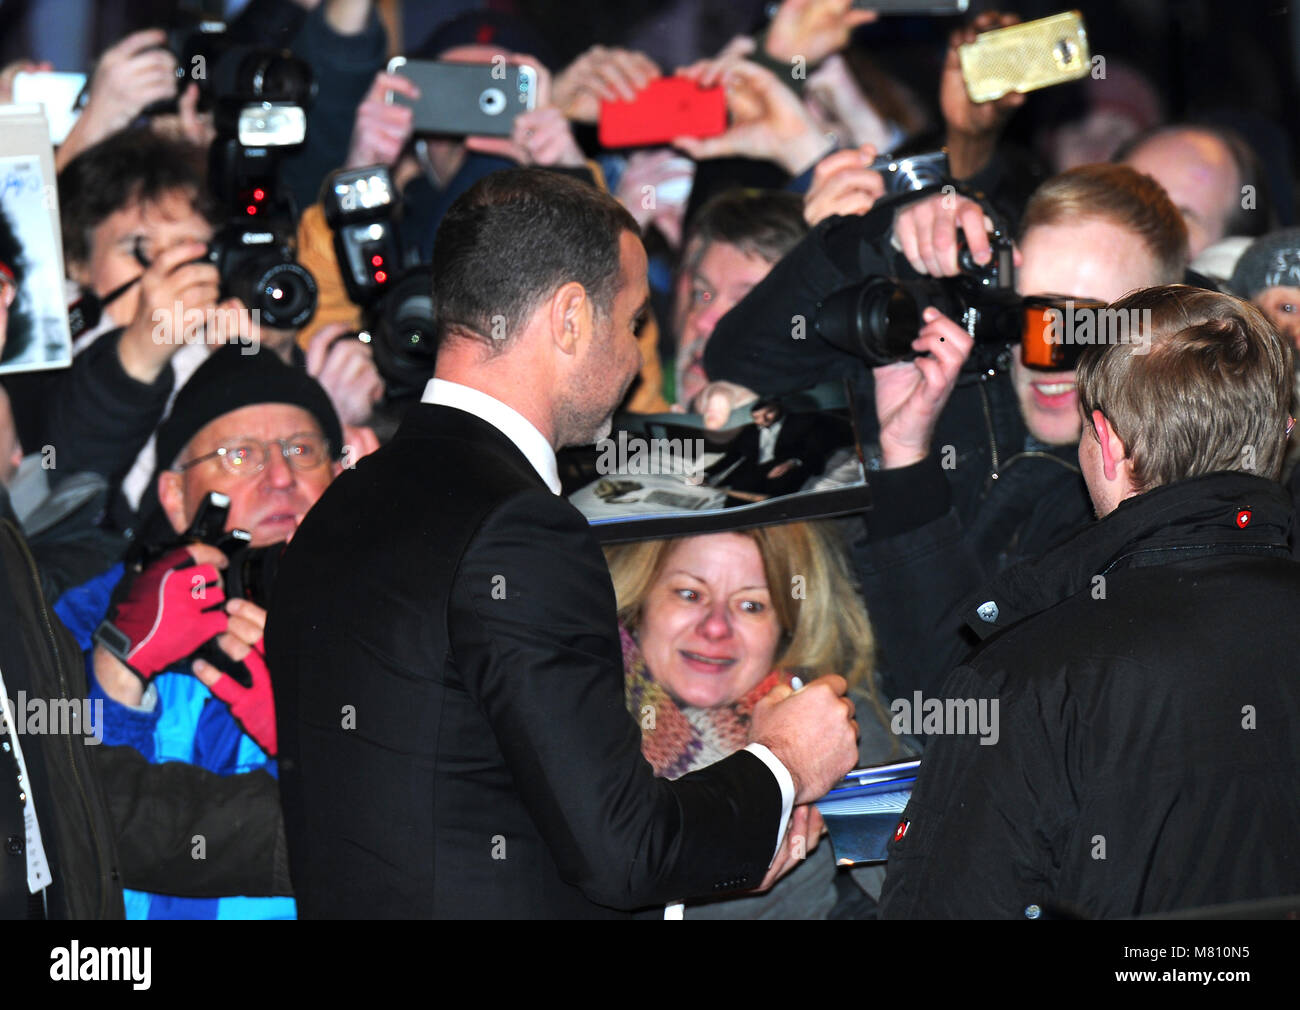 February 15th, 2018 - Berlin  Liev Schreiber arriving at the Isle of Dogs Red Carpet during the Berlinale Film Festival 2018 Stock Photo